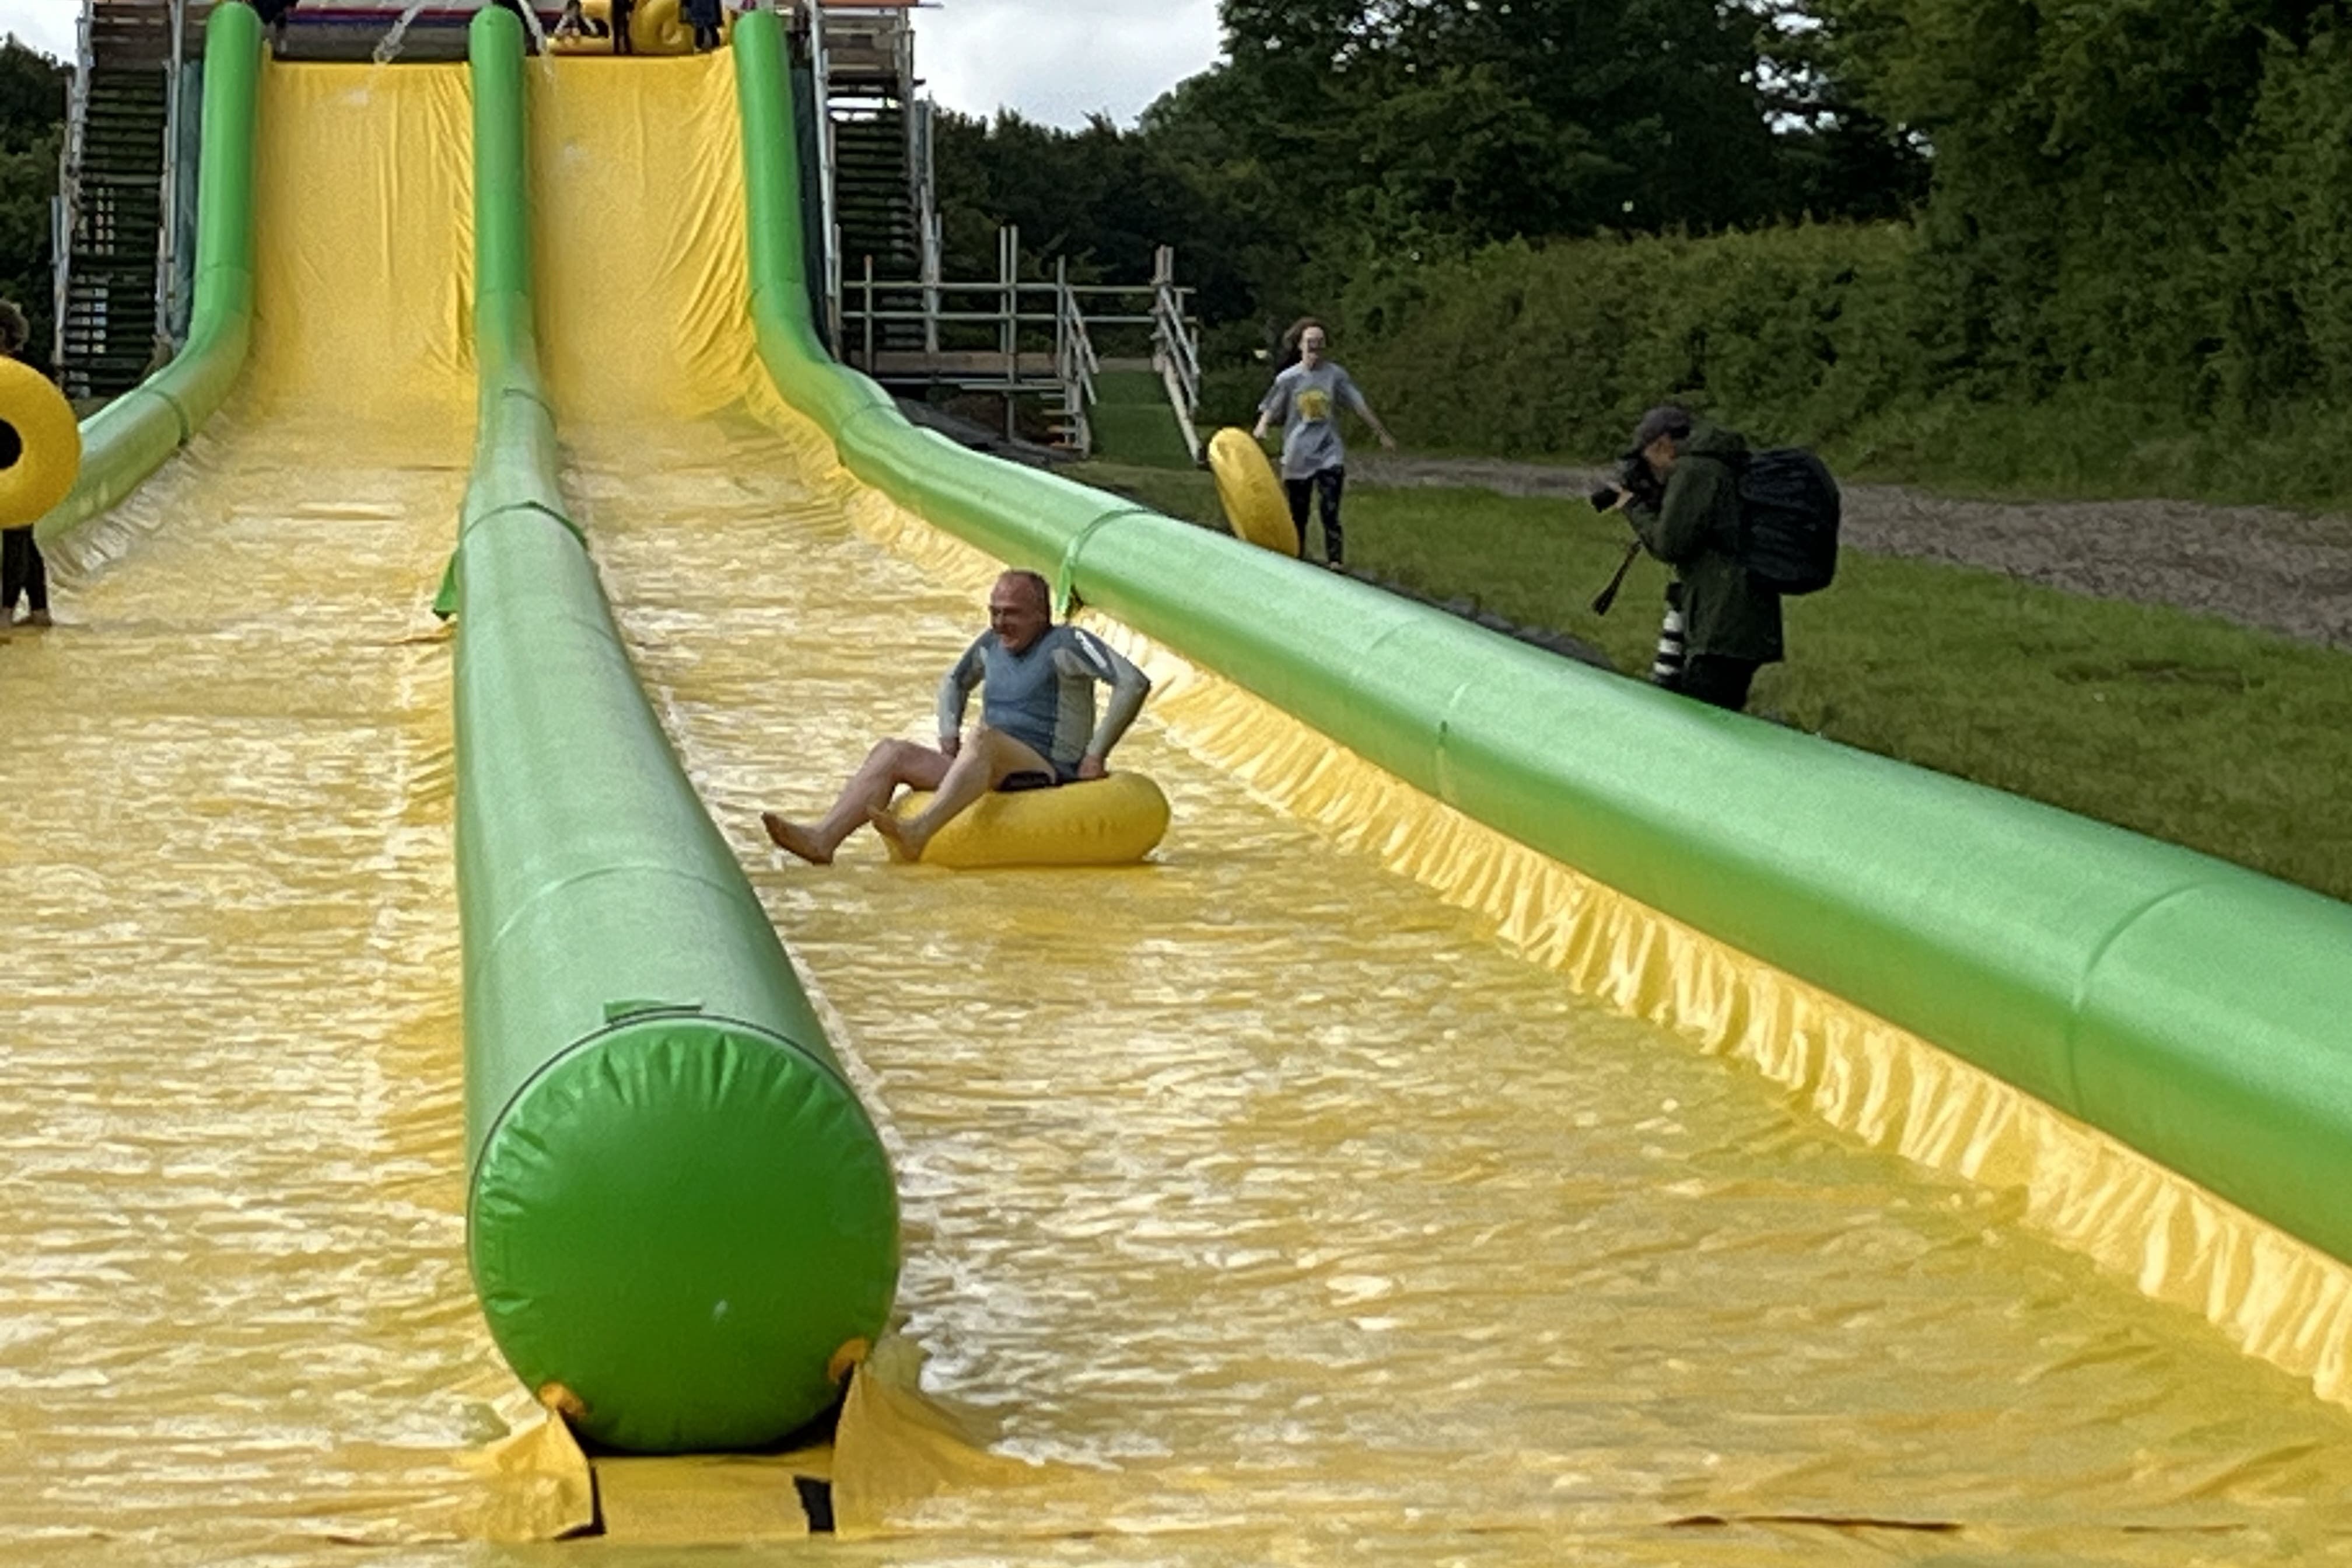 Leader of Liberal Democrats Sir Ed Davey after he rode down the Ultimate Slip n Slide attraction near Frome, Somerset, while on the General Election campaign trail (Rod Minchin/PA)